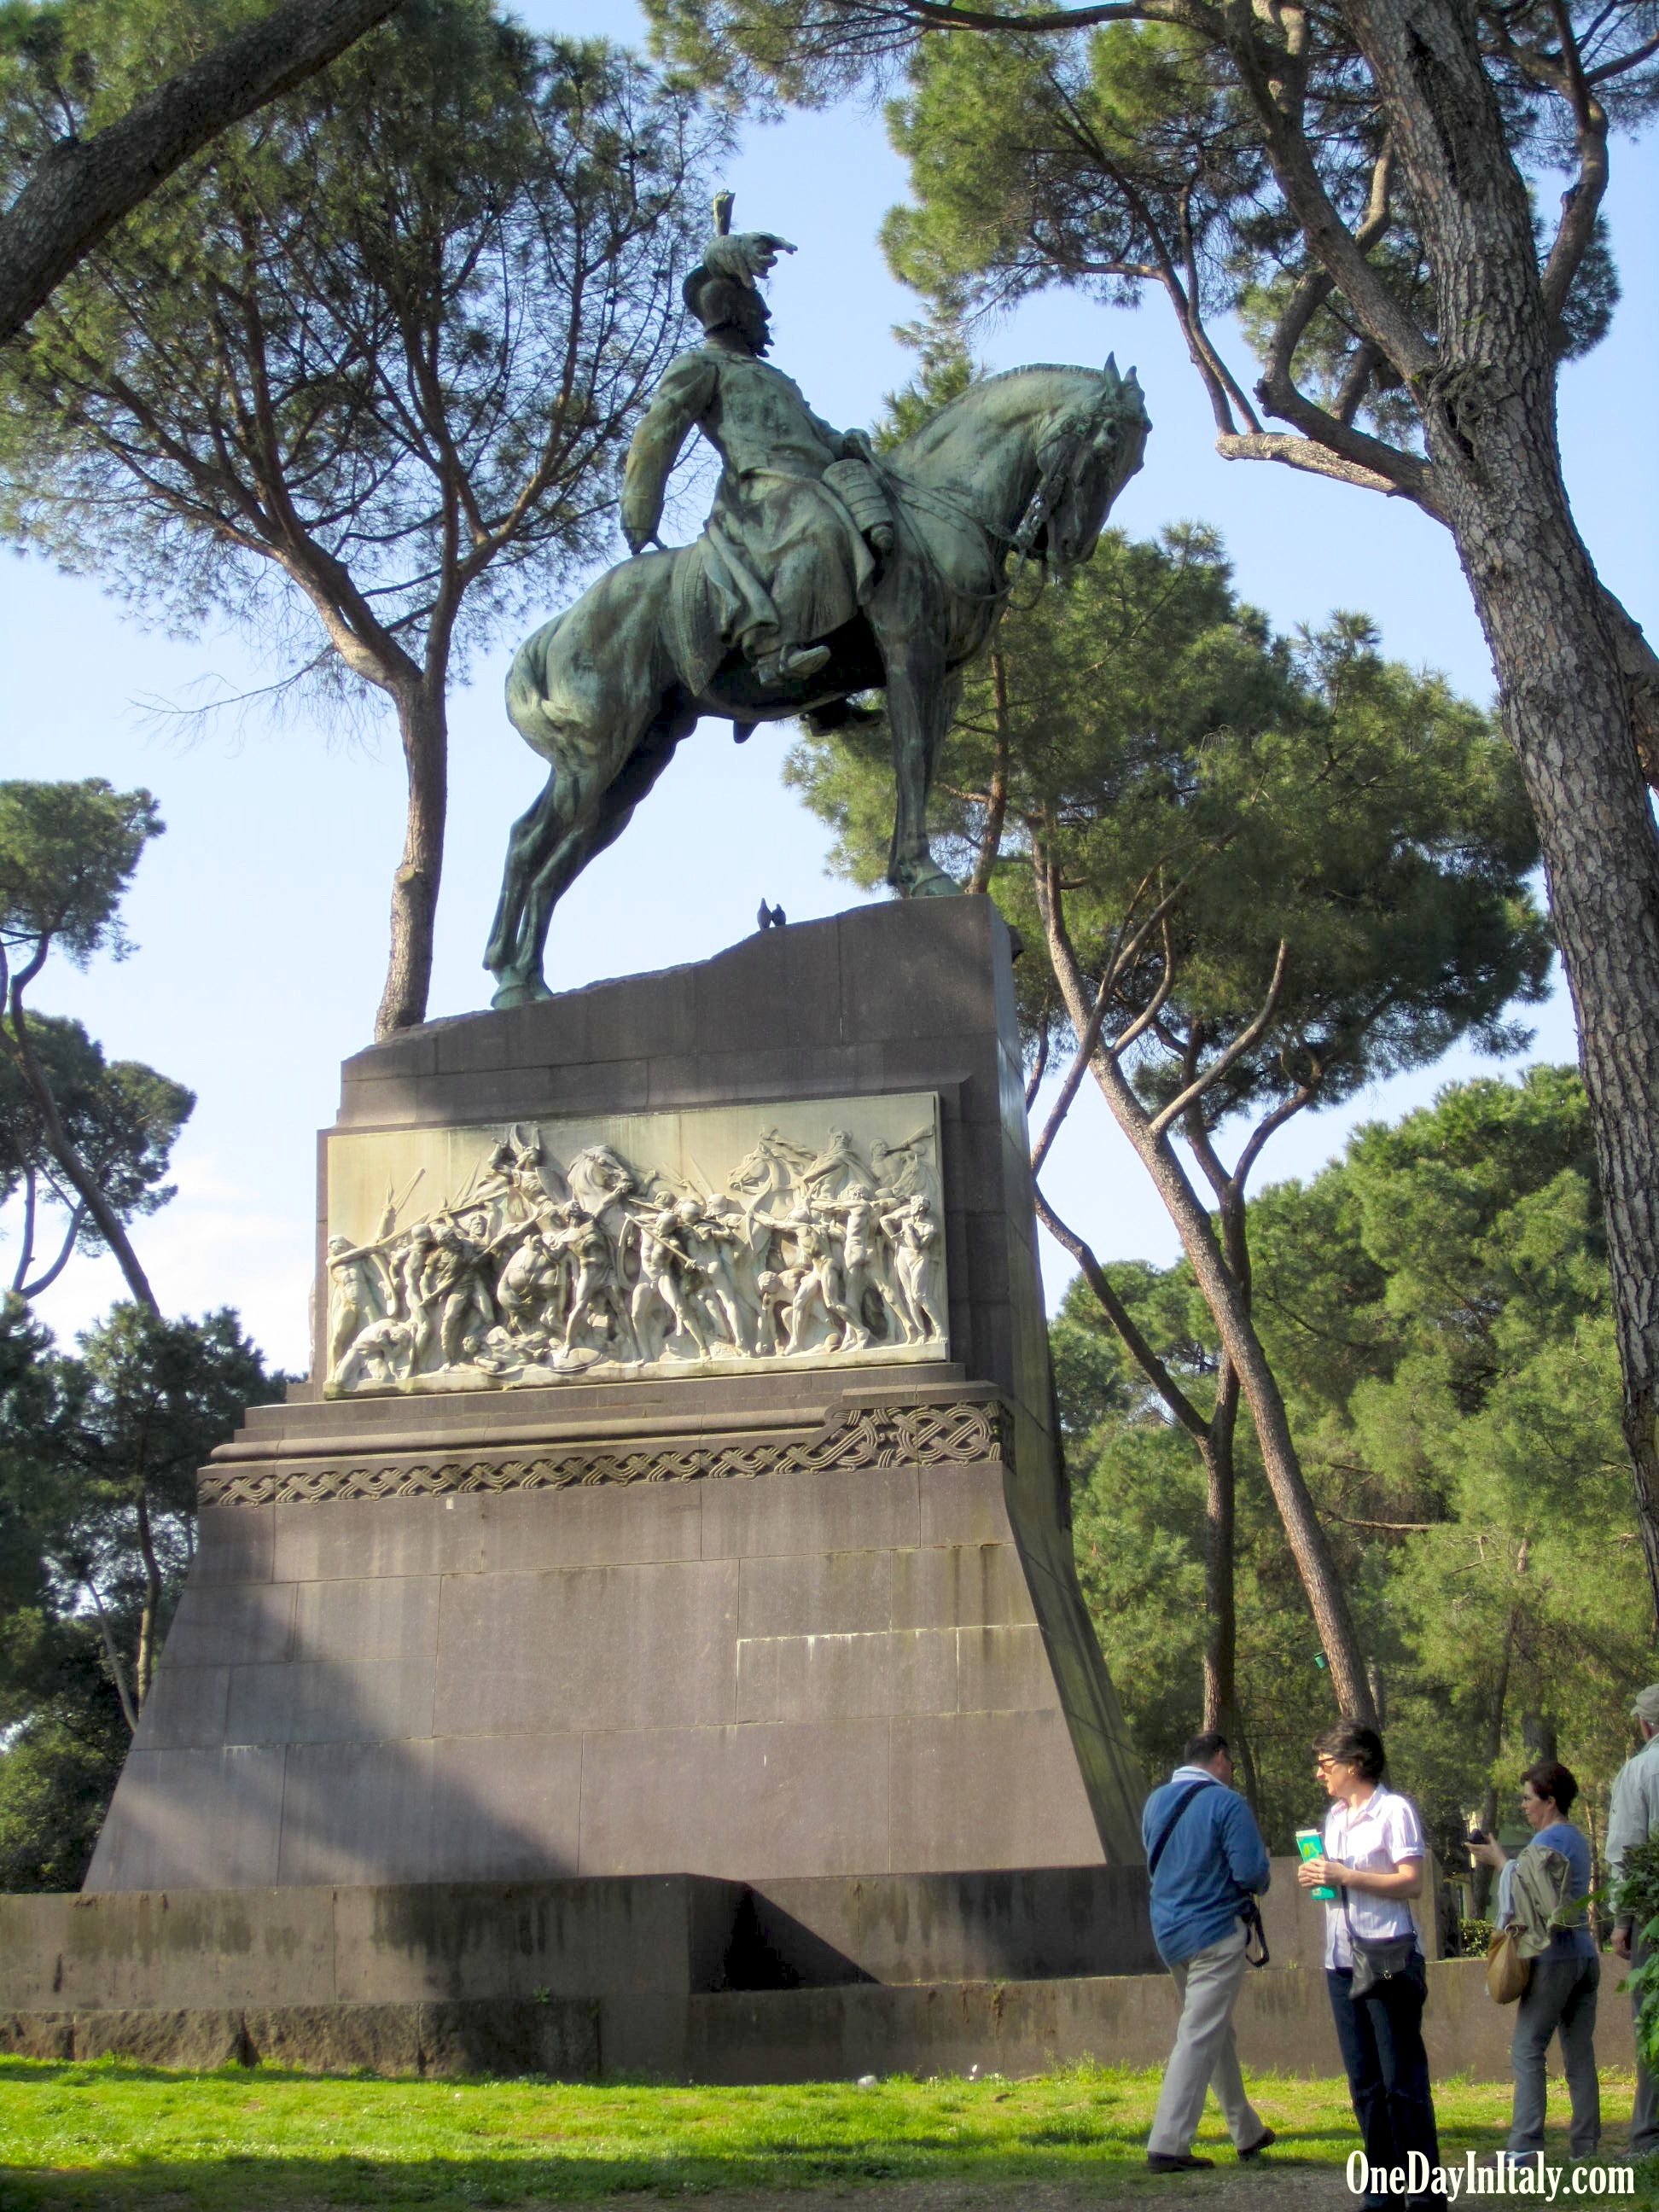 In the Borghese Gardens